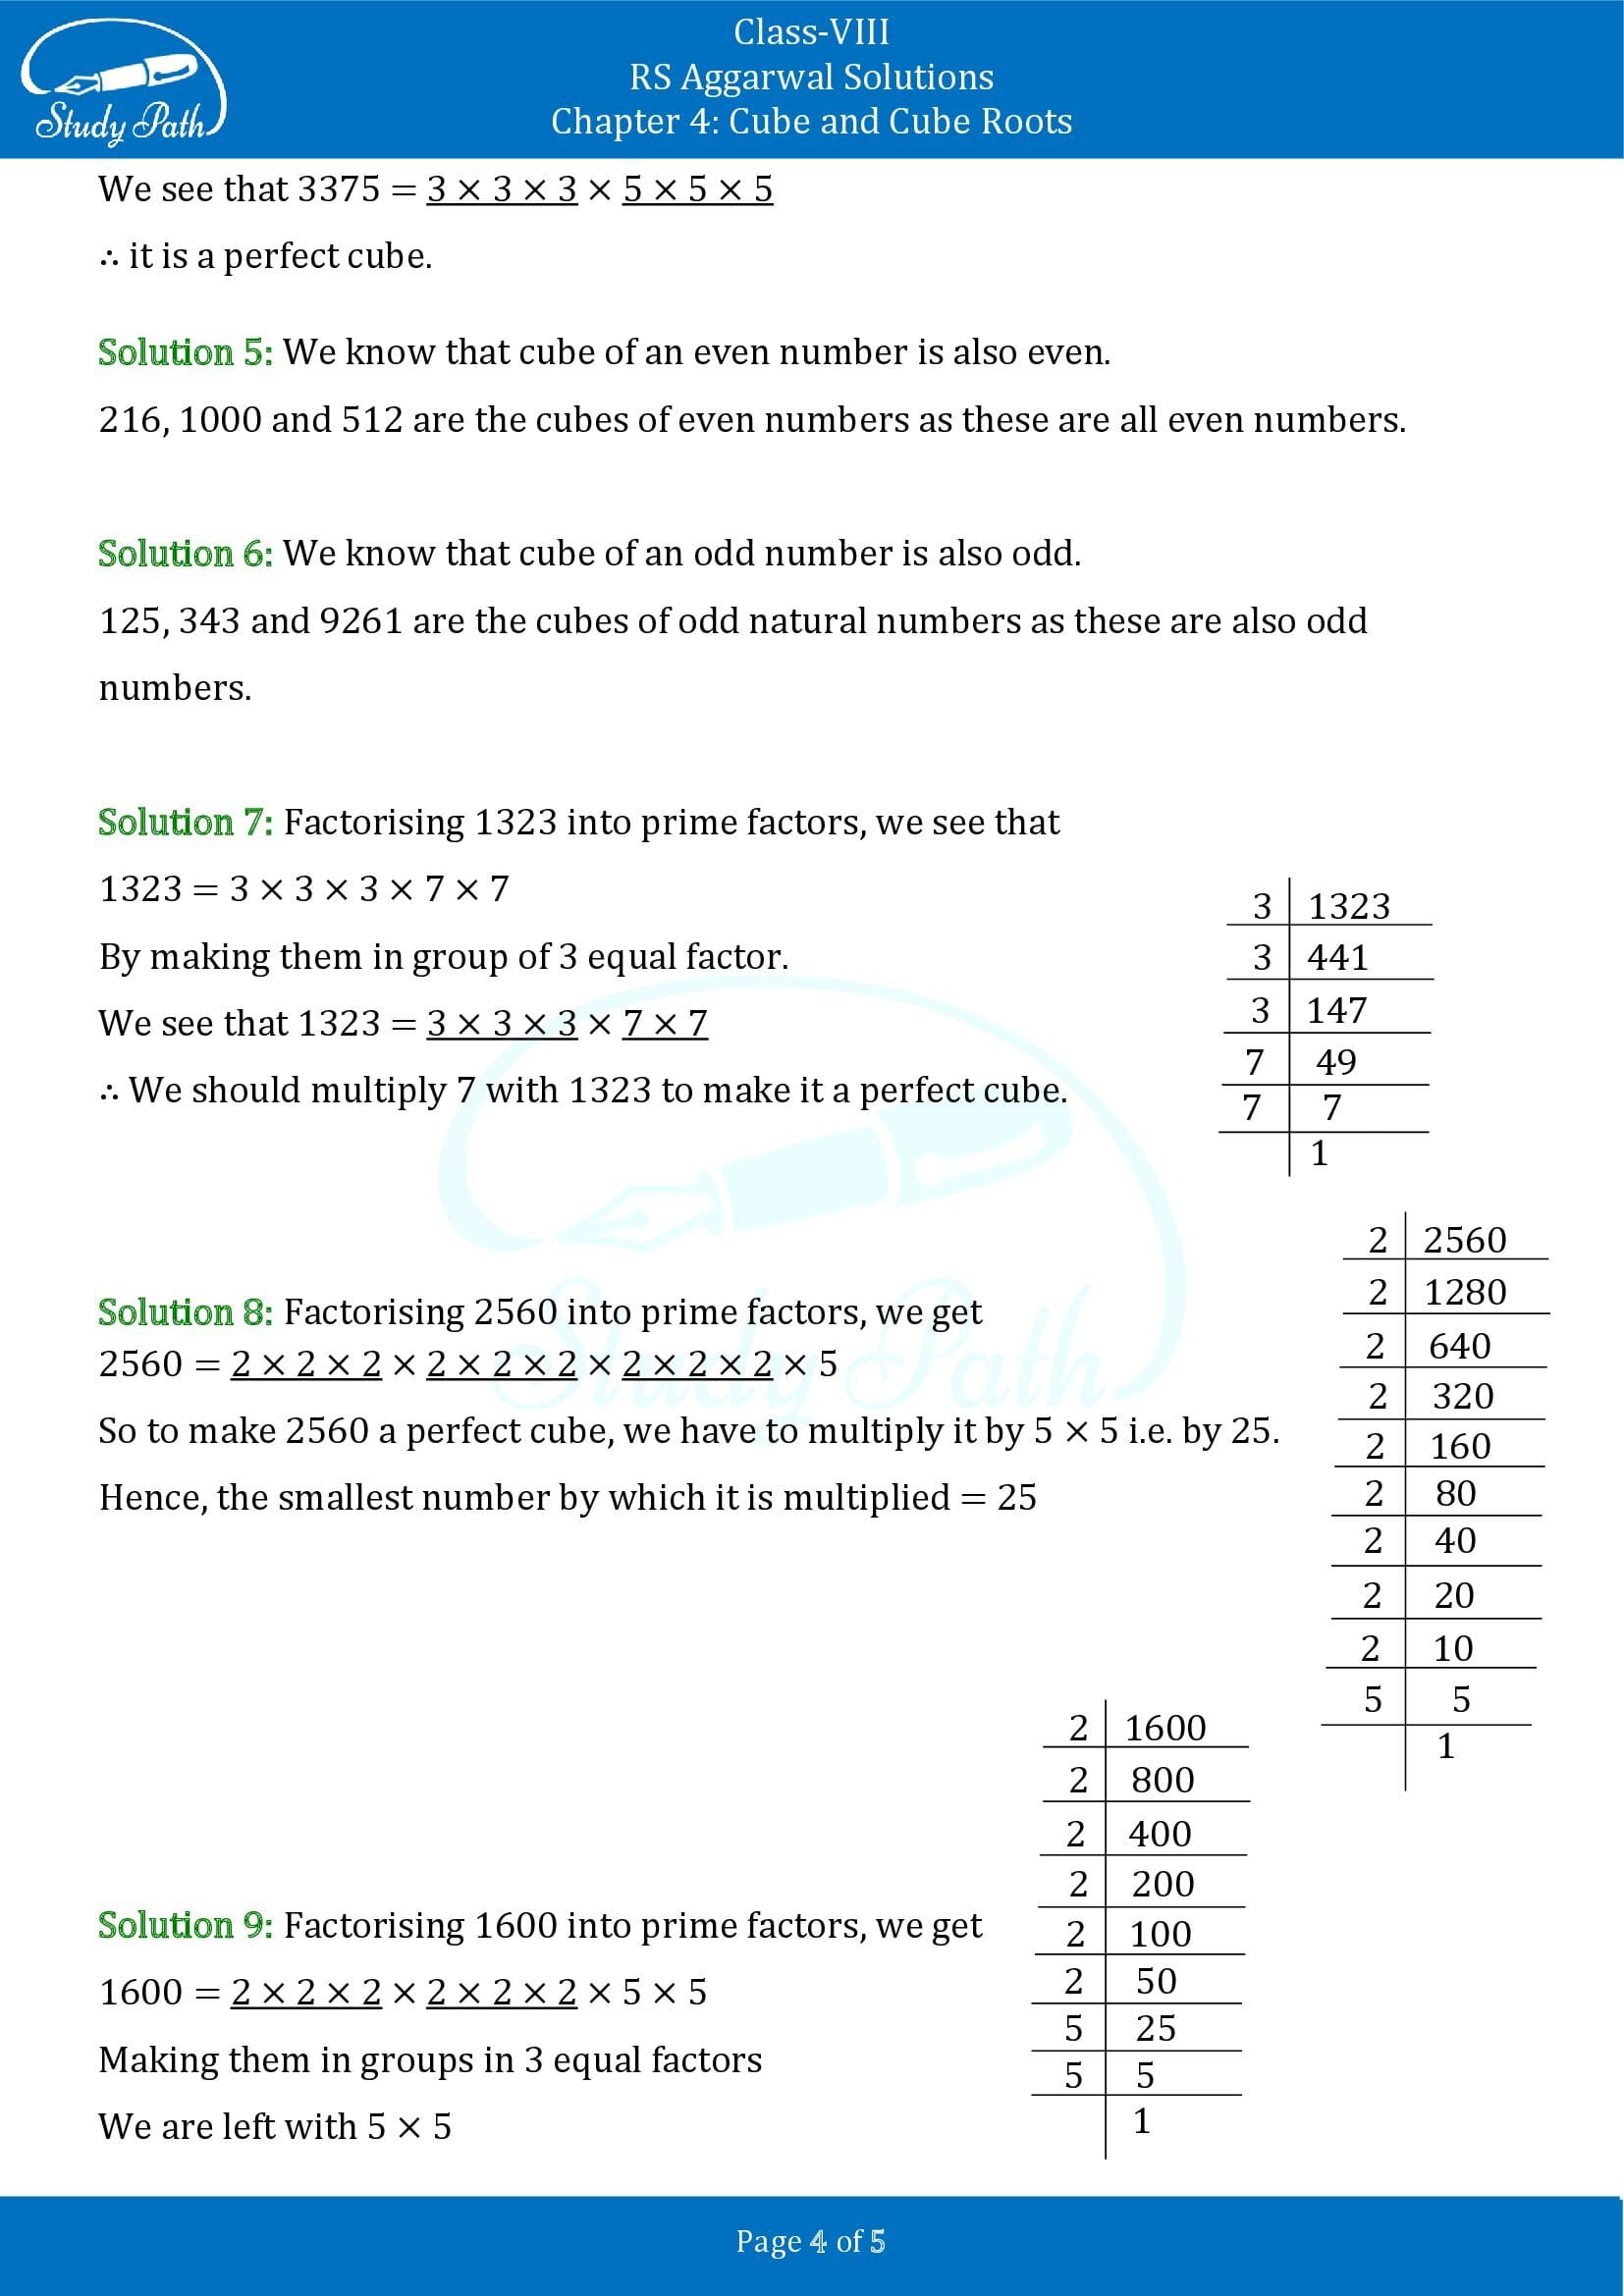 RS Aggarwal Solutions Class 8 Chapter 4 Cube and Cube Roots Exercise 4A 00004